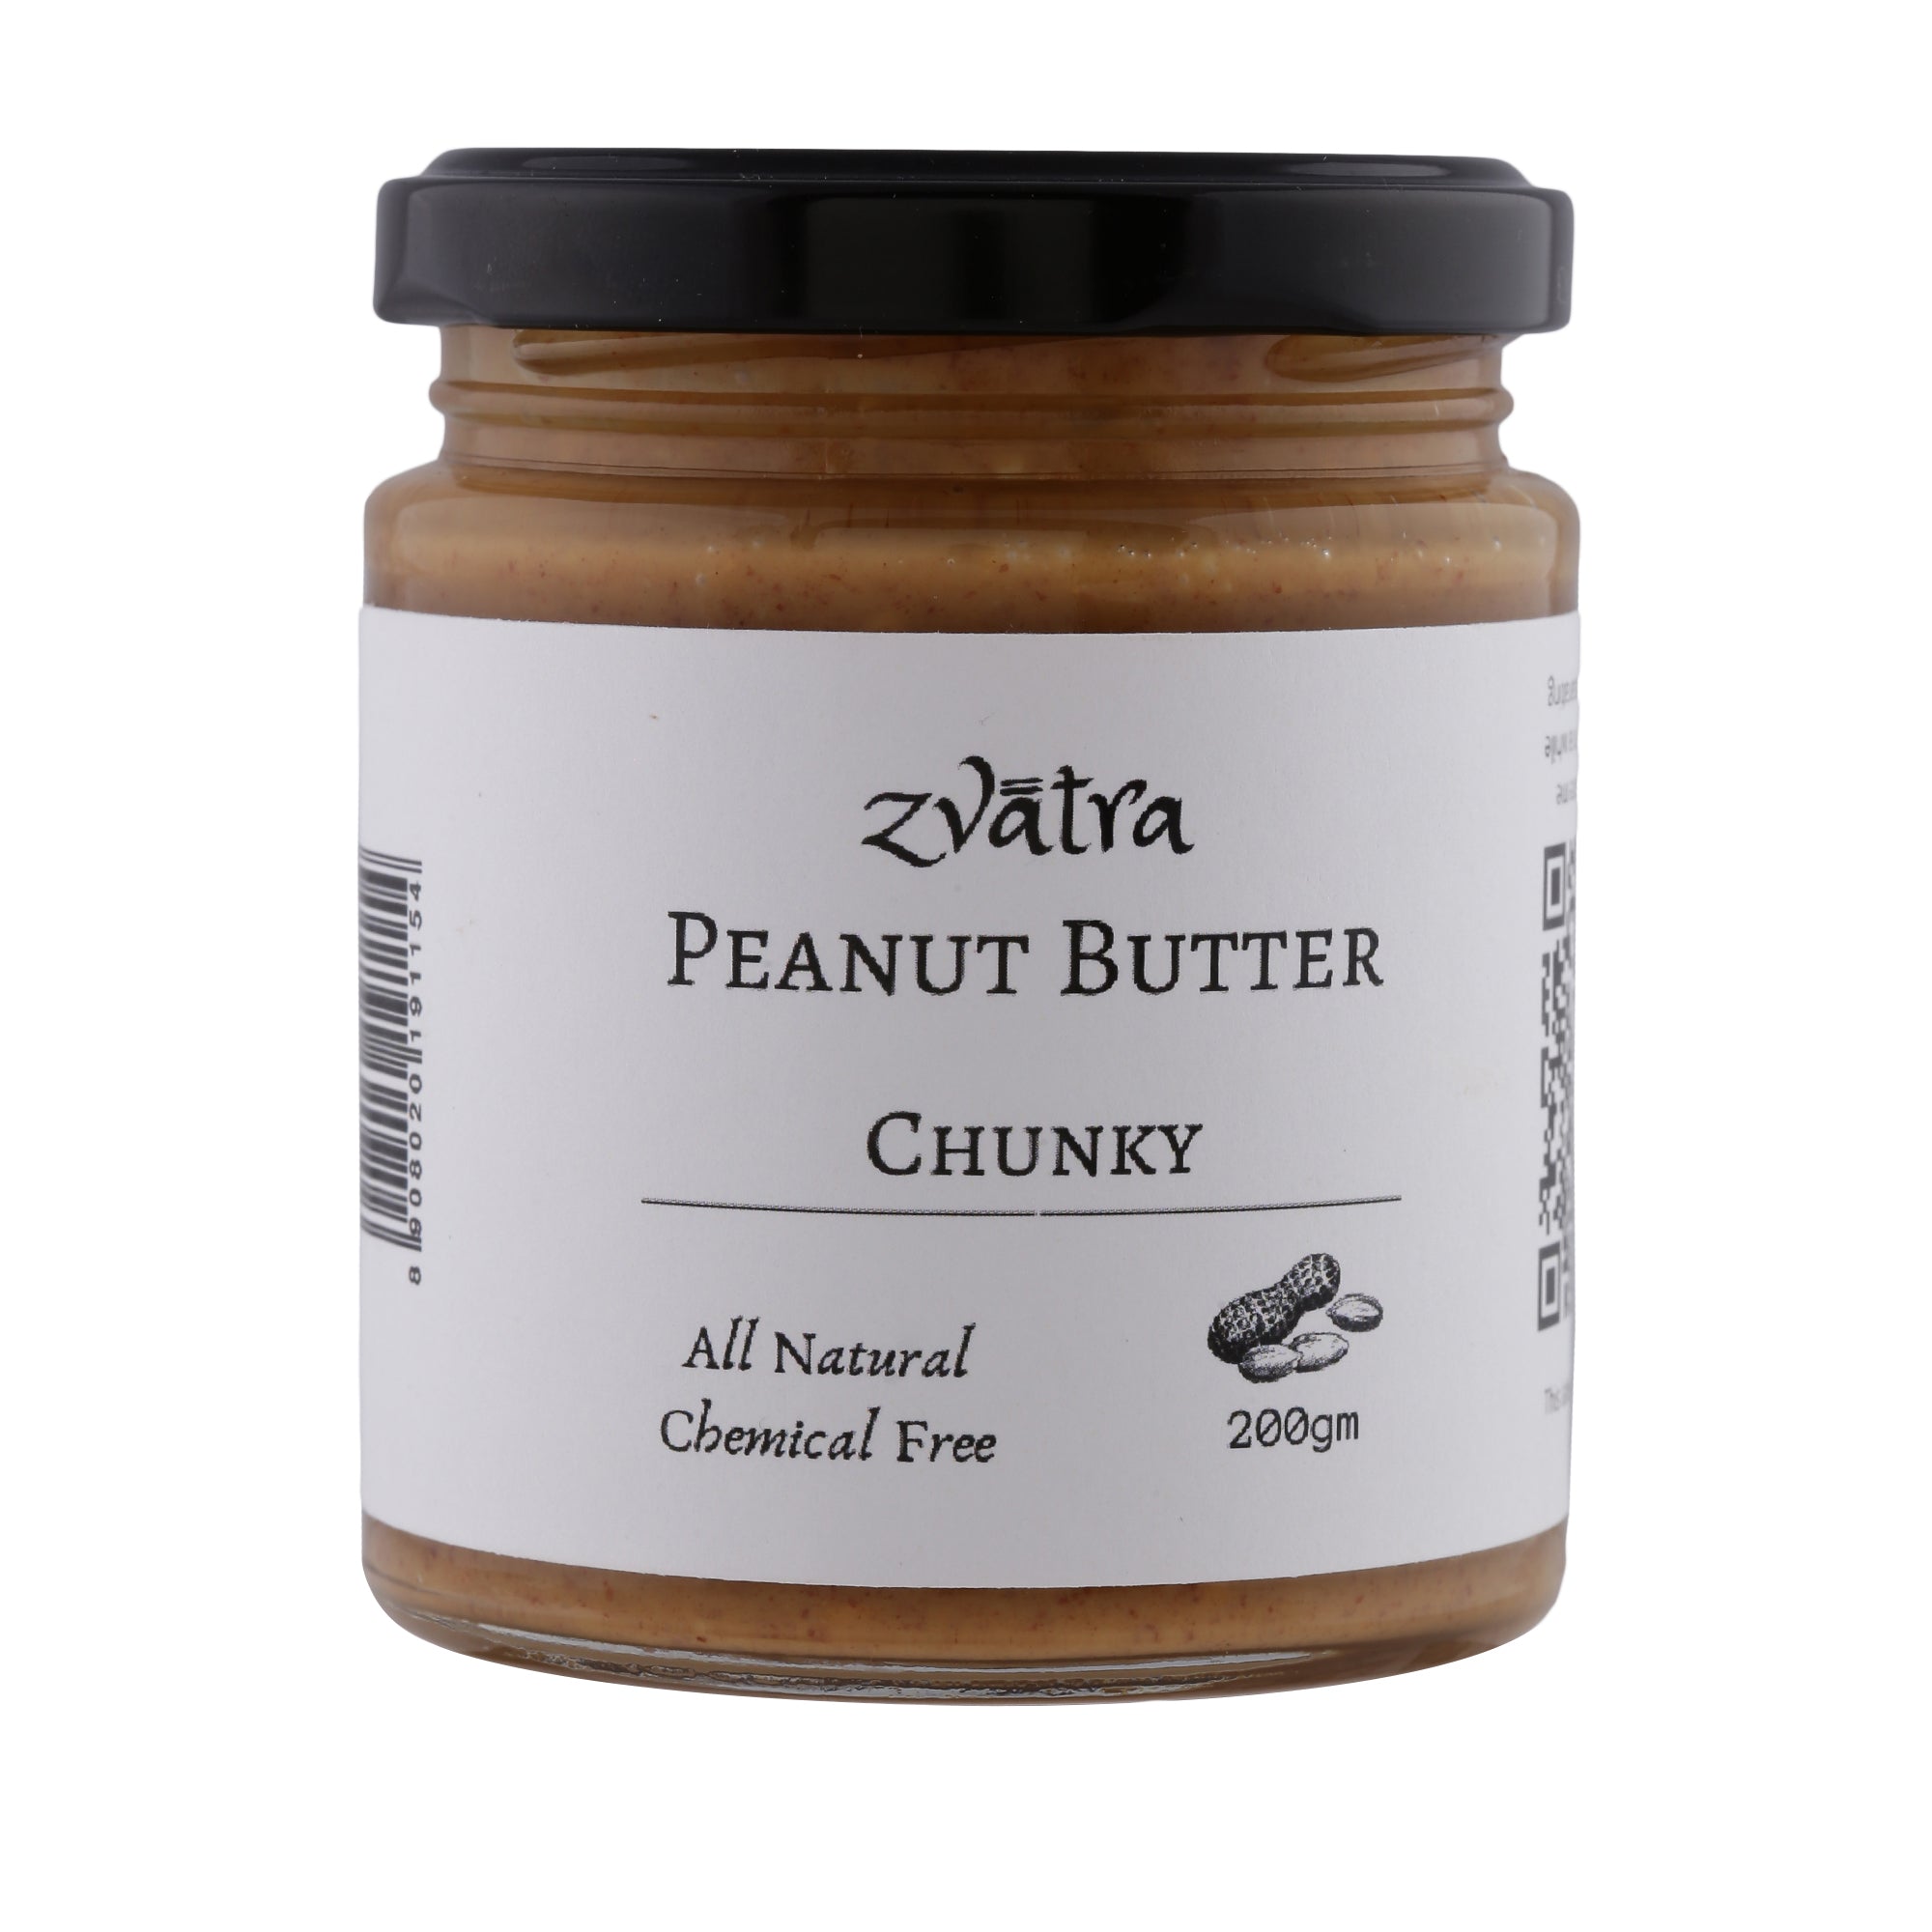 Peanut Butter - Chunky - Sweetened with Jaggery